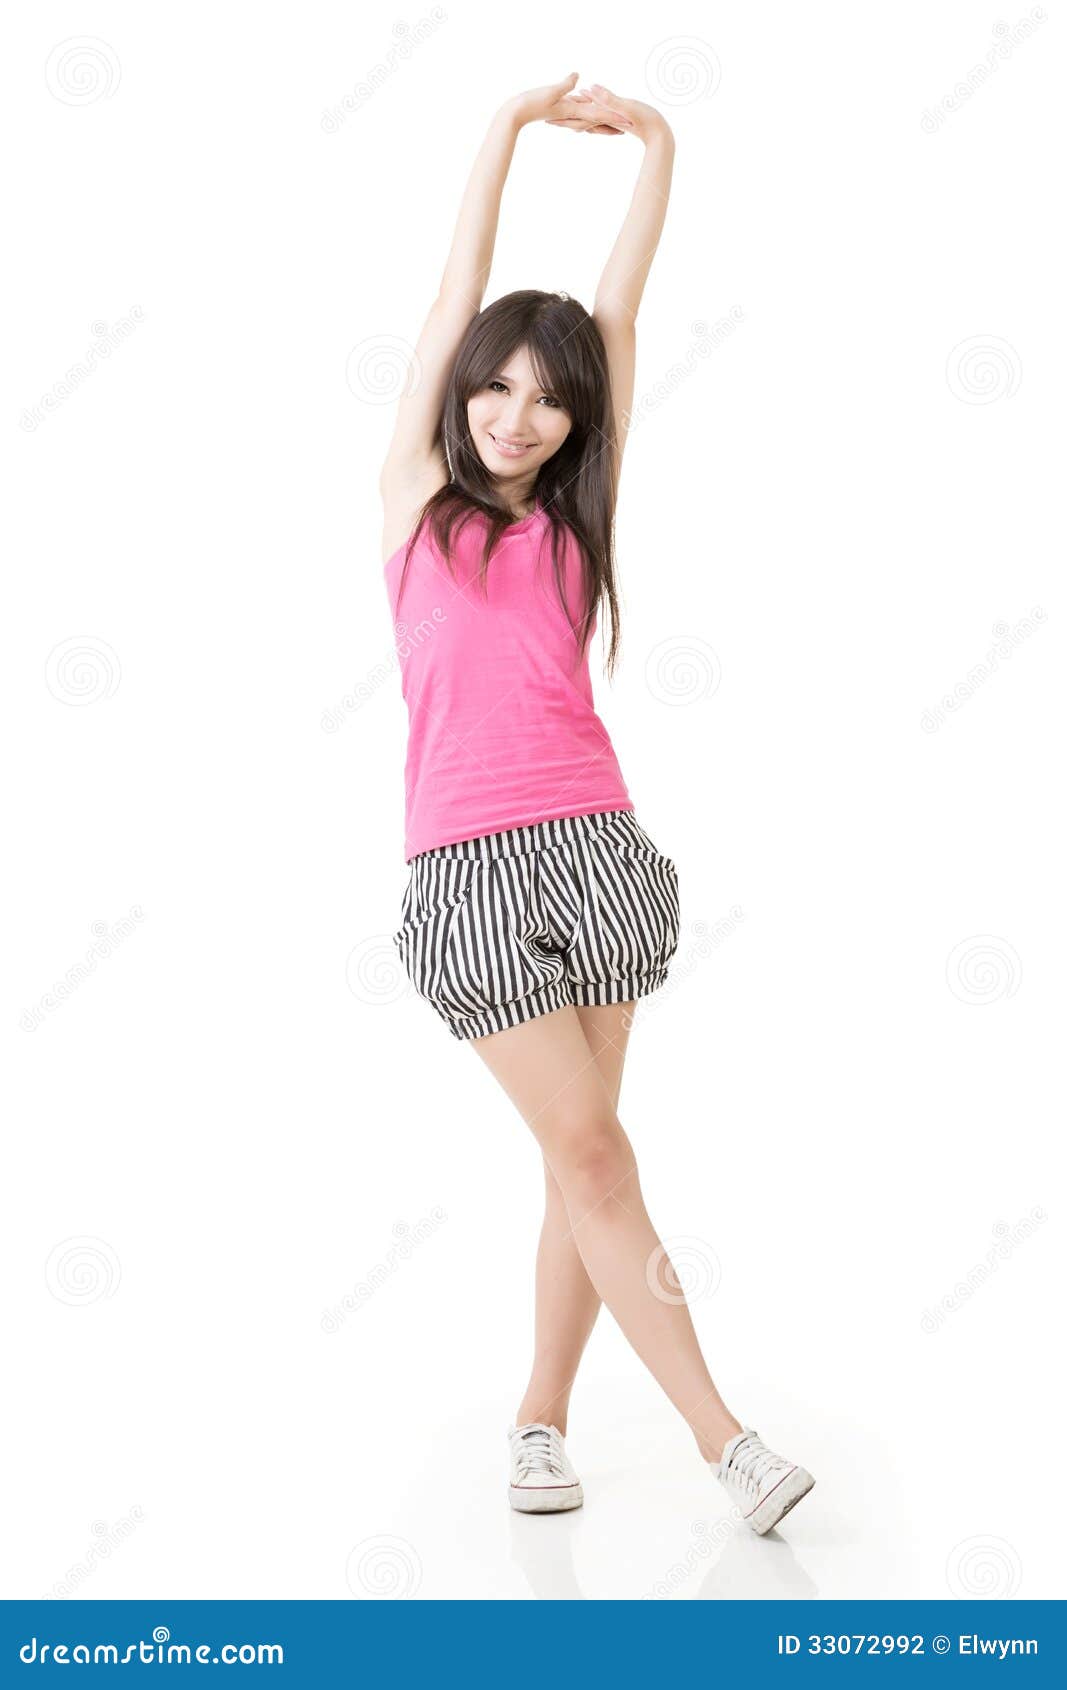 Asian Woman Stretch Arms and Feel Free Stock Photo - Image of female ...